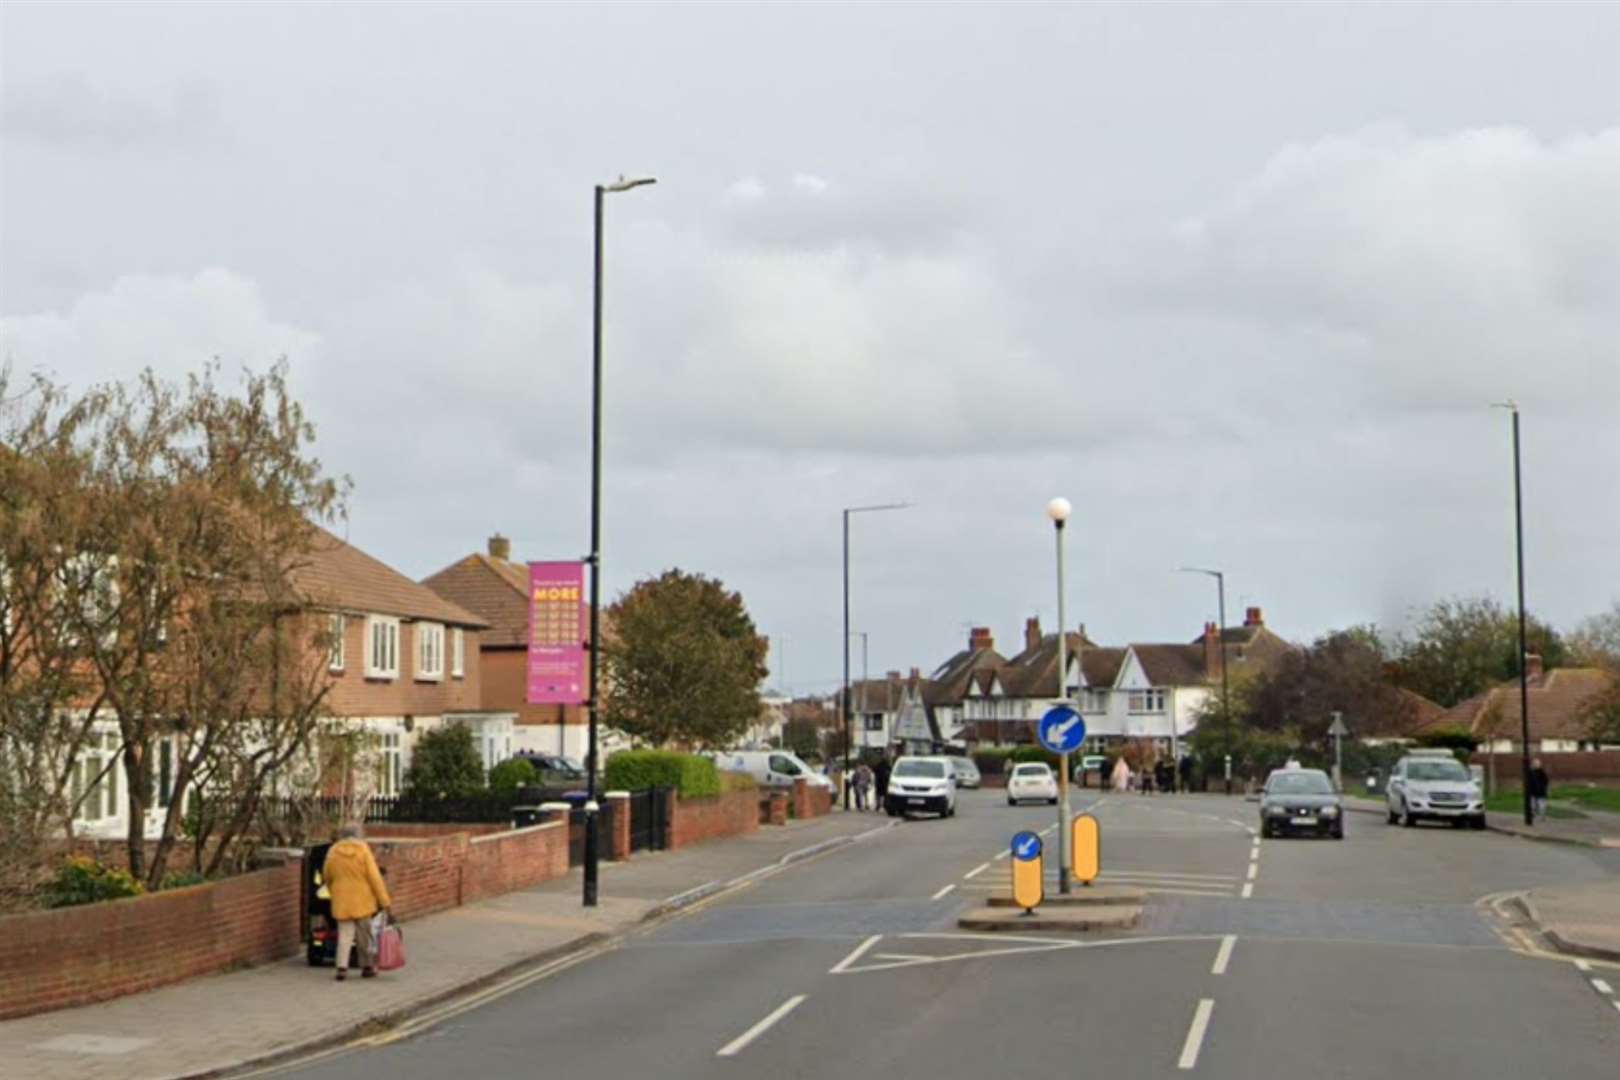 Police were called to a disturbance at Northdown Road in Margate this morning. PIcture: Google